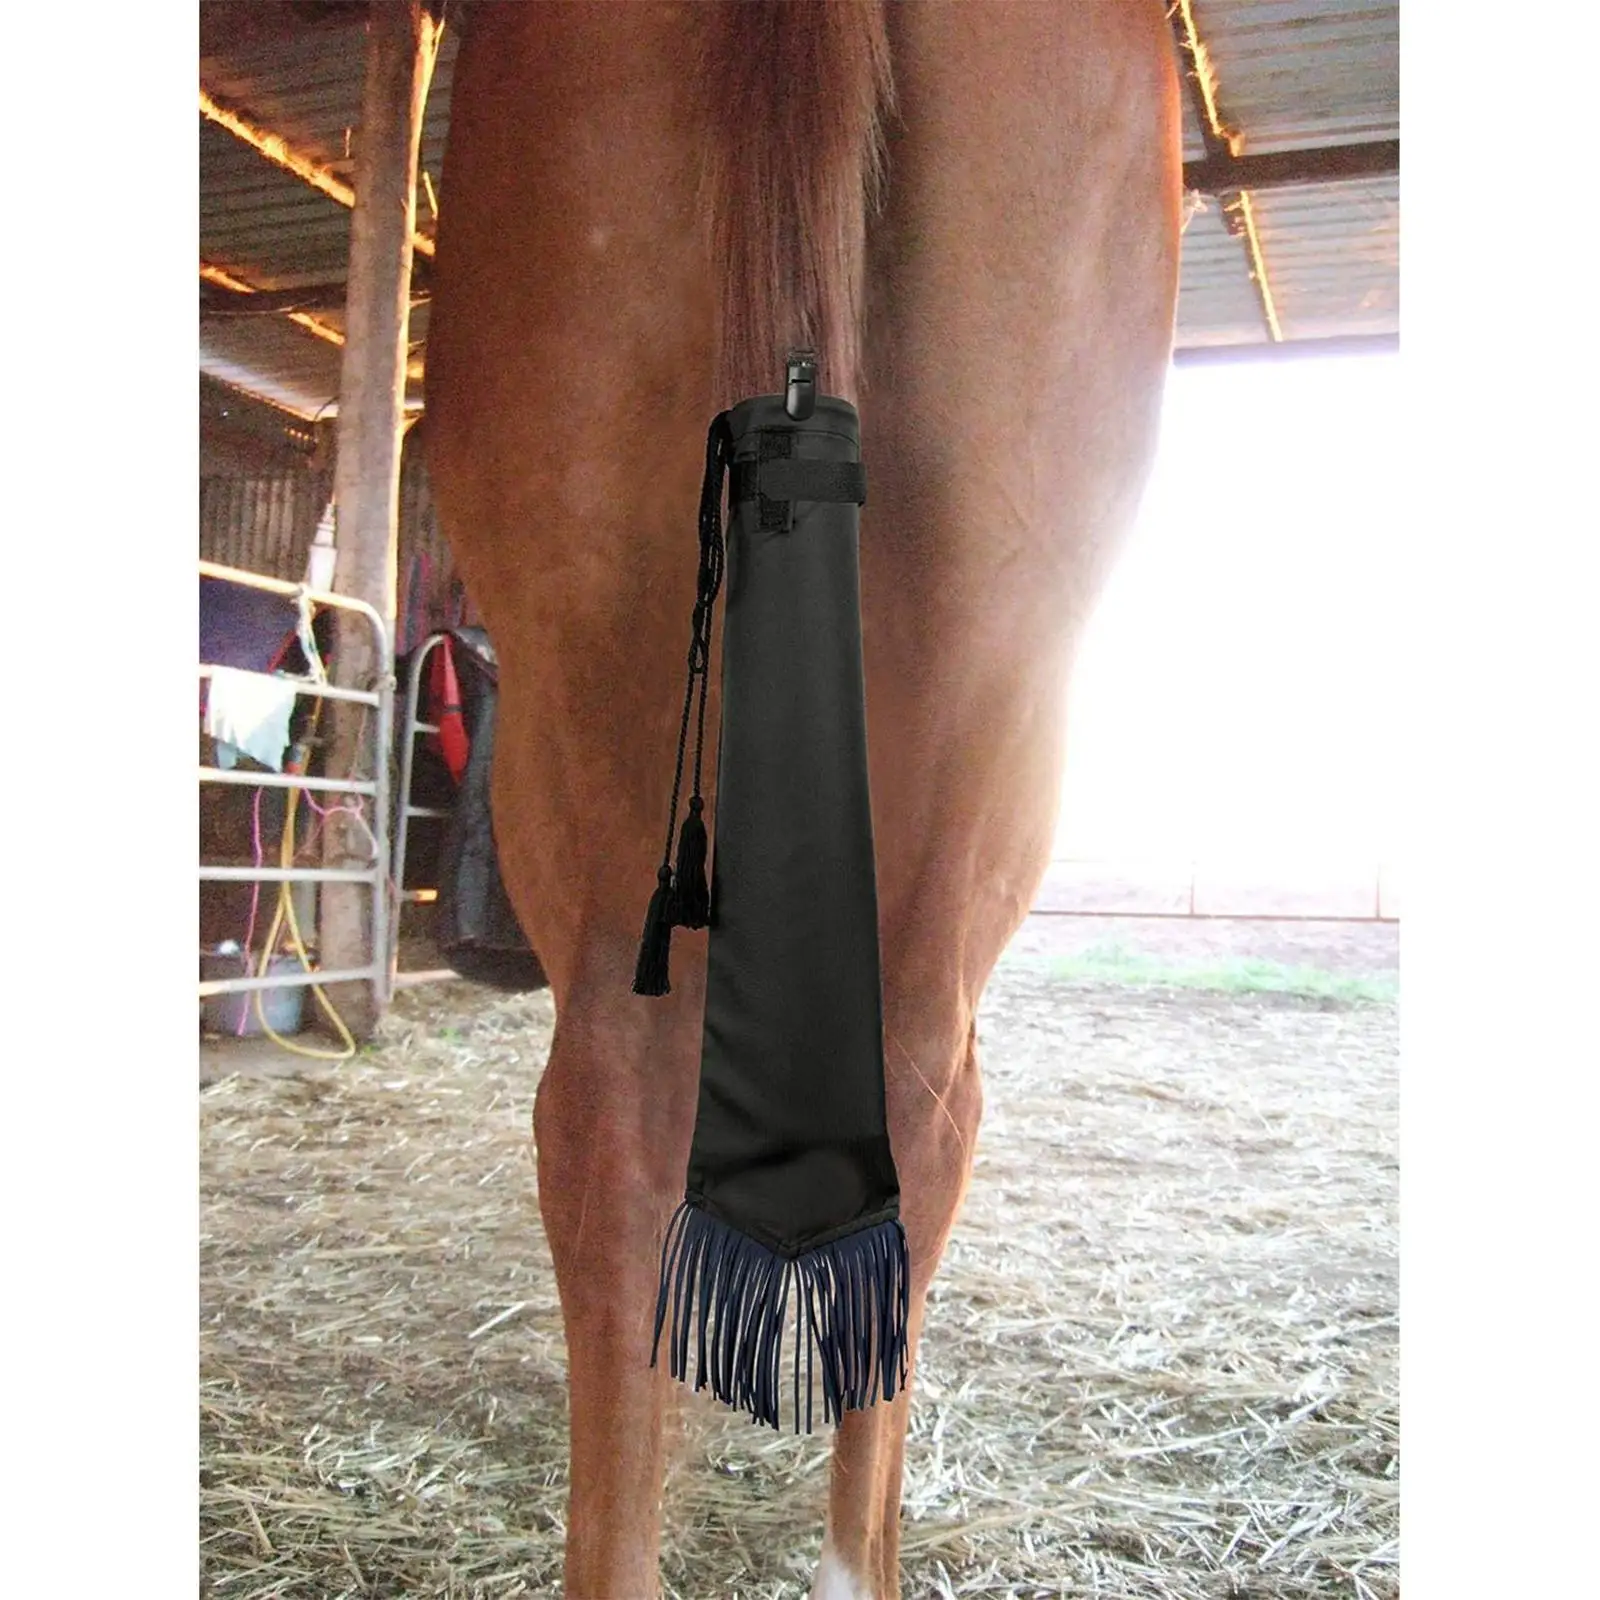 Horse Tail Bag with Fringe, Tail Bags for Horses, Black